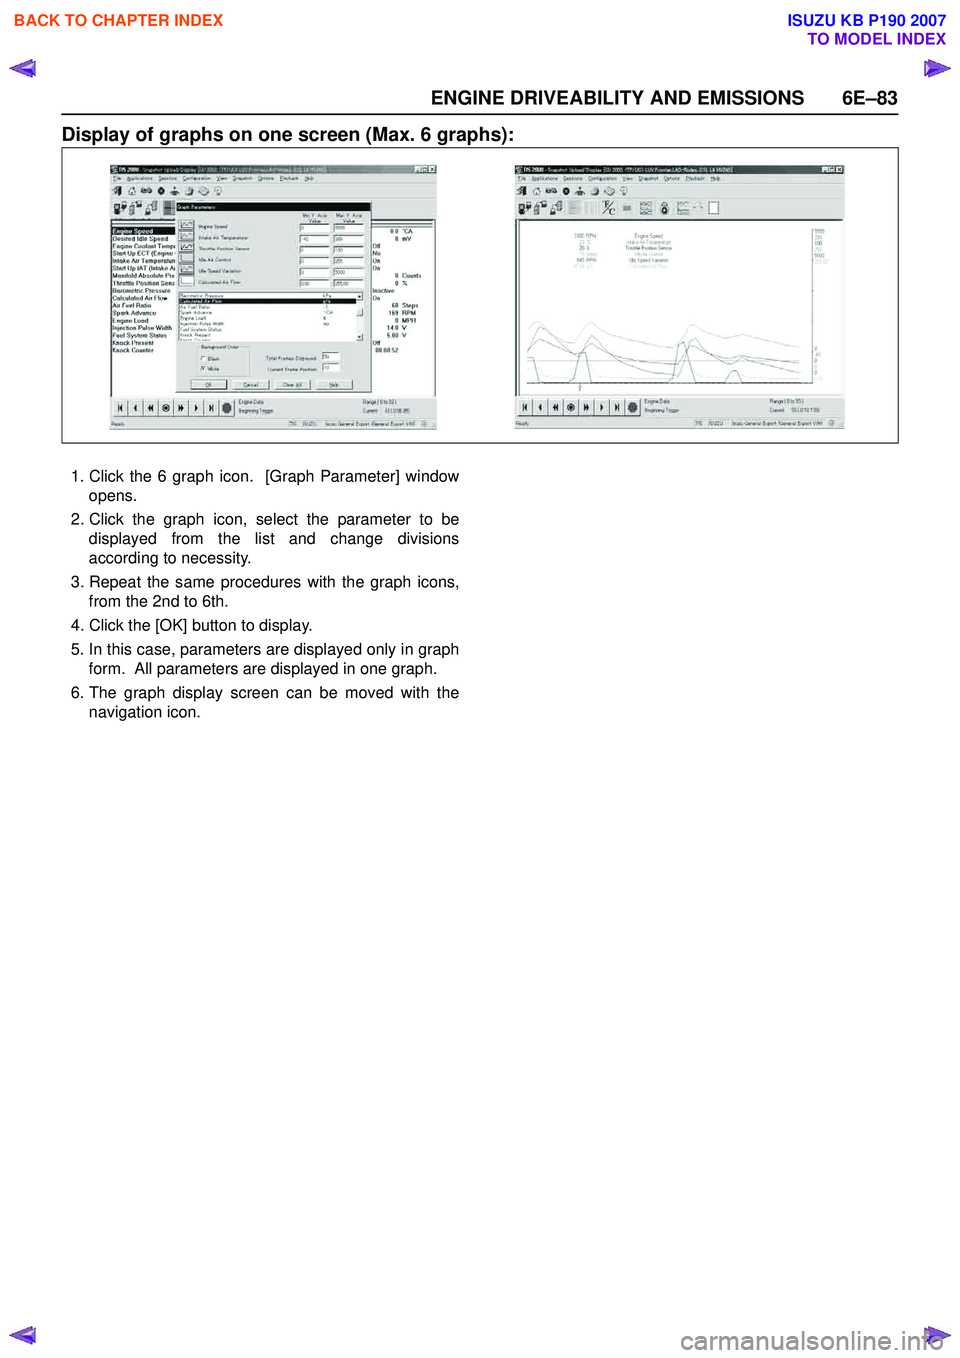 ISUZU KB P190 2007  Workshop Repair Manual ENGINE DRIVEABILITY AND EMISSIONS 6E–83
Display of graphs on one screen (Max. 6 graphs): 
1. Click the 6 graph icon.  [Graph Parameter] windowopens.
2. Click the graph icon, select the parameter to 